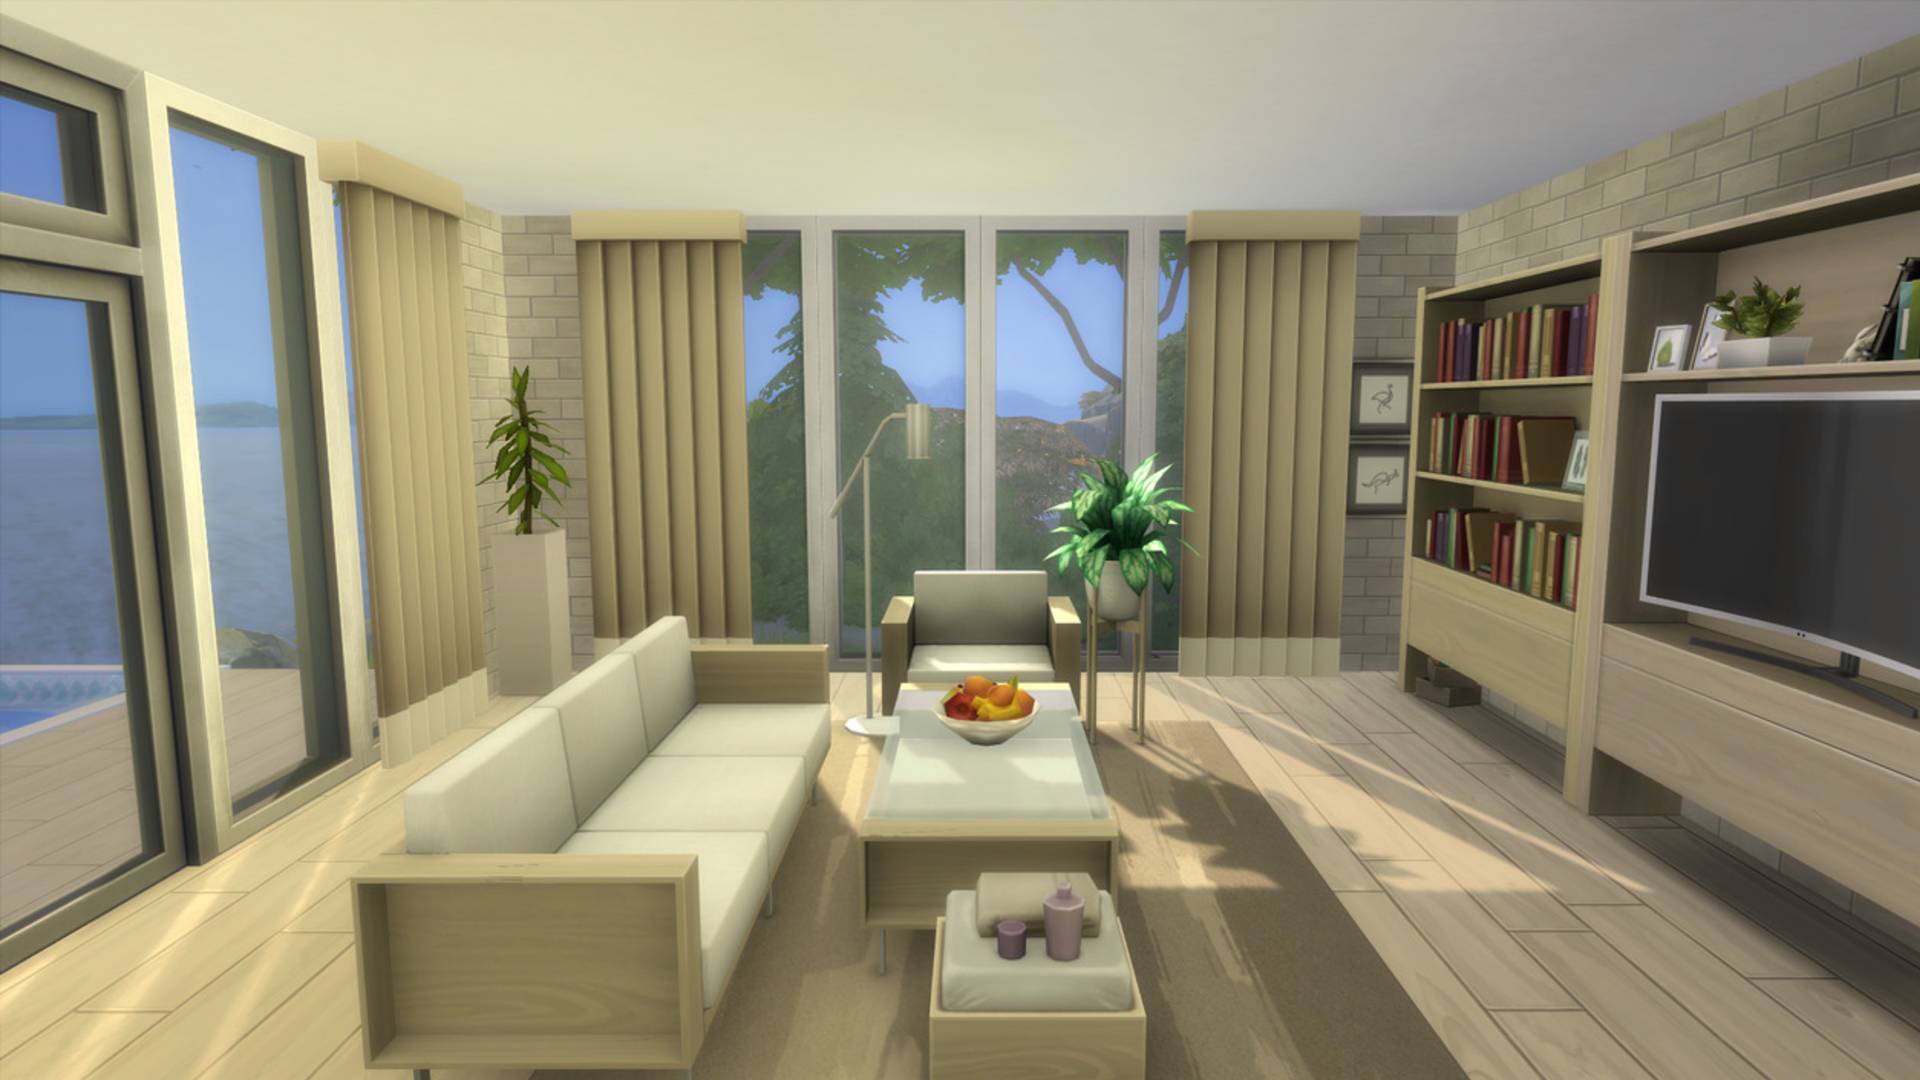 Sims 4 CC: Stylish, minimalistic off-white living room with bookcase and large TV.